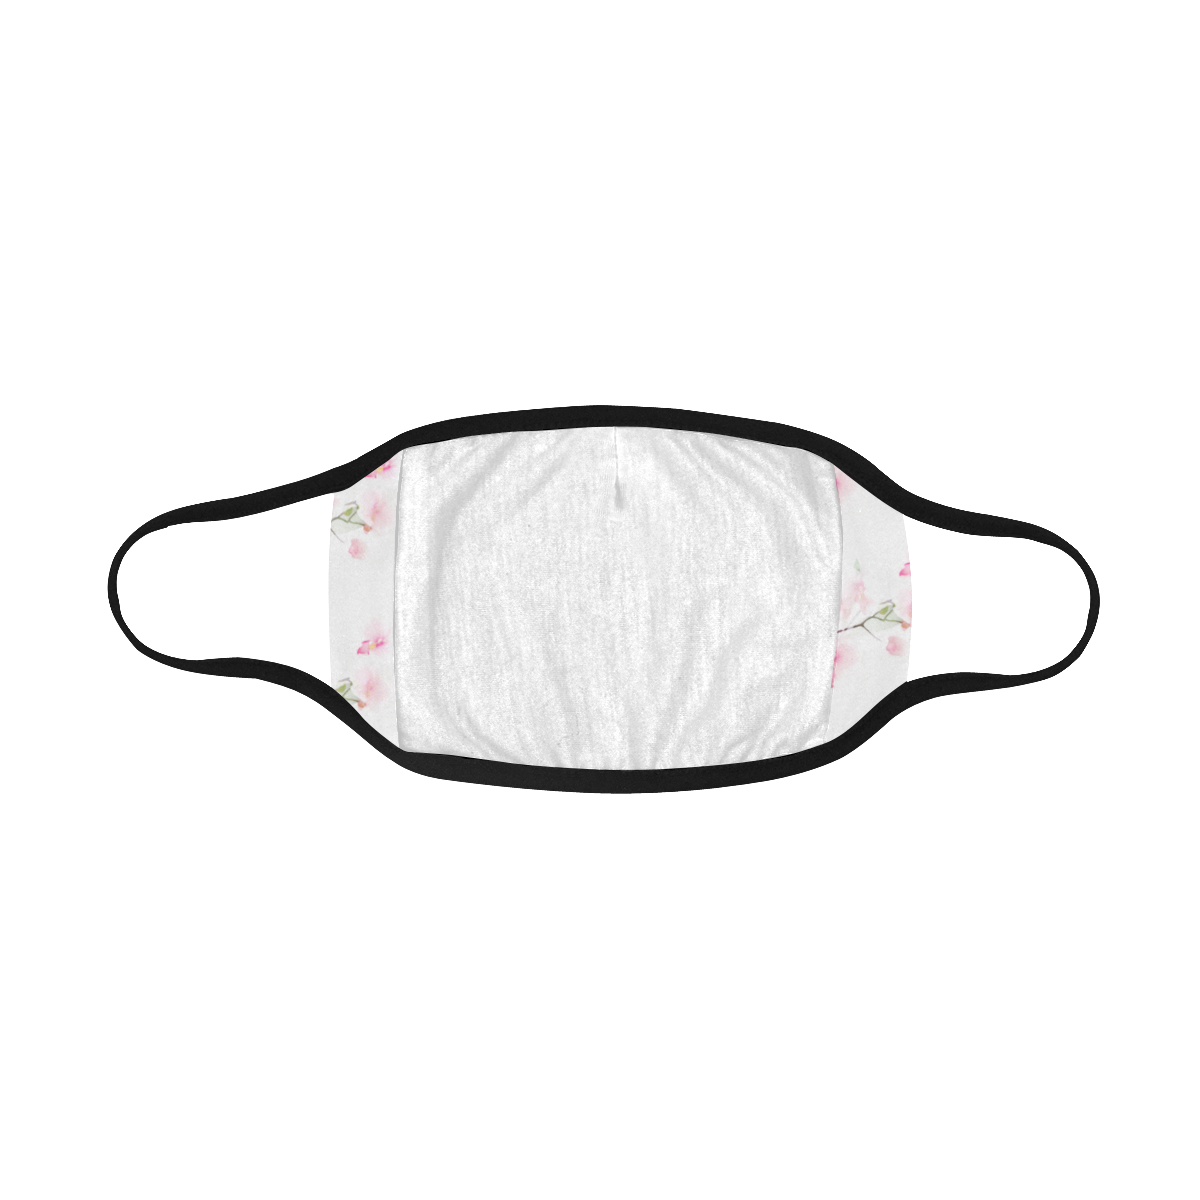 ORCHIDEE ROSE PATTERN Mouth Mask (60 Filters Included) (Non-medical Products)